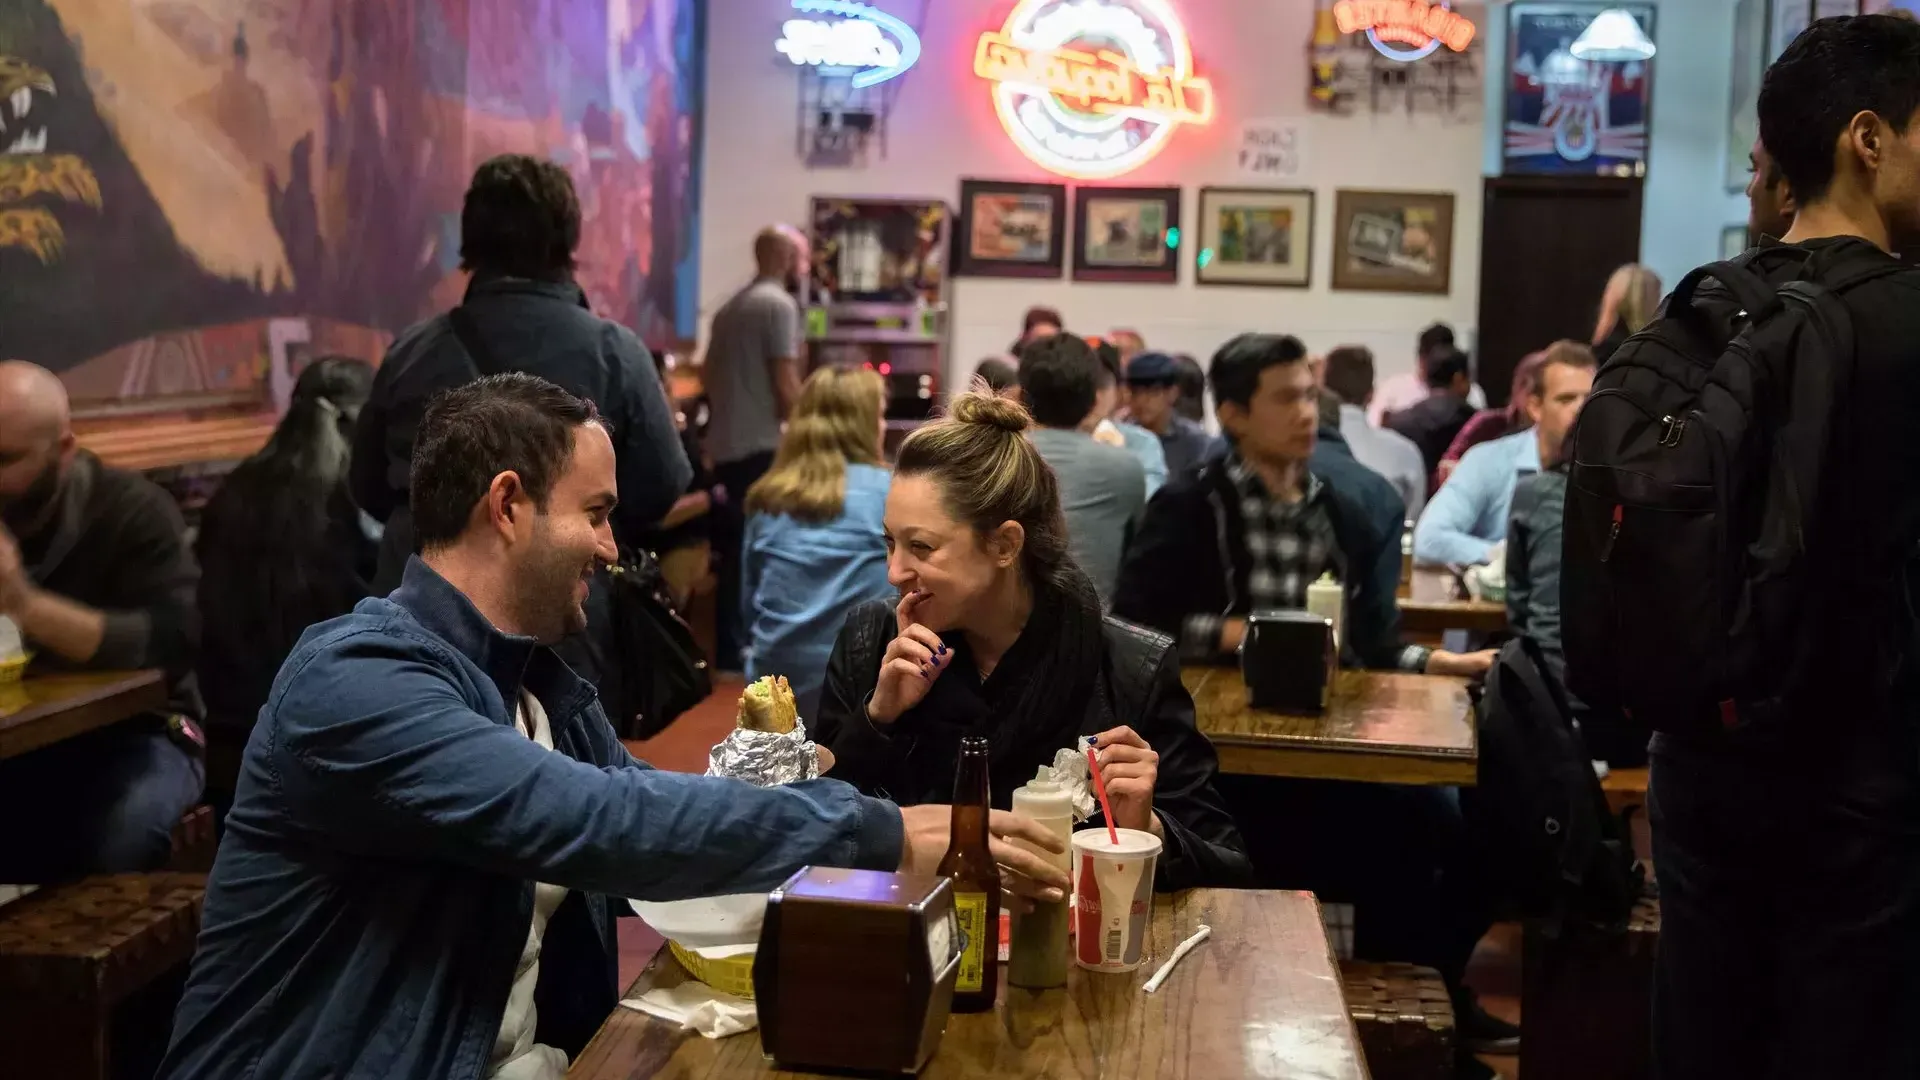 Visitors enjoy authentic Mexican food in San Francisco's Mission neighborhood.